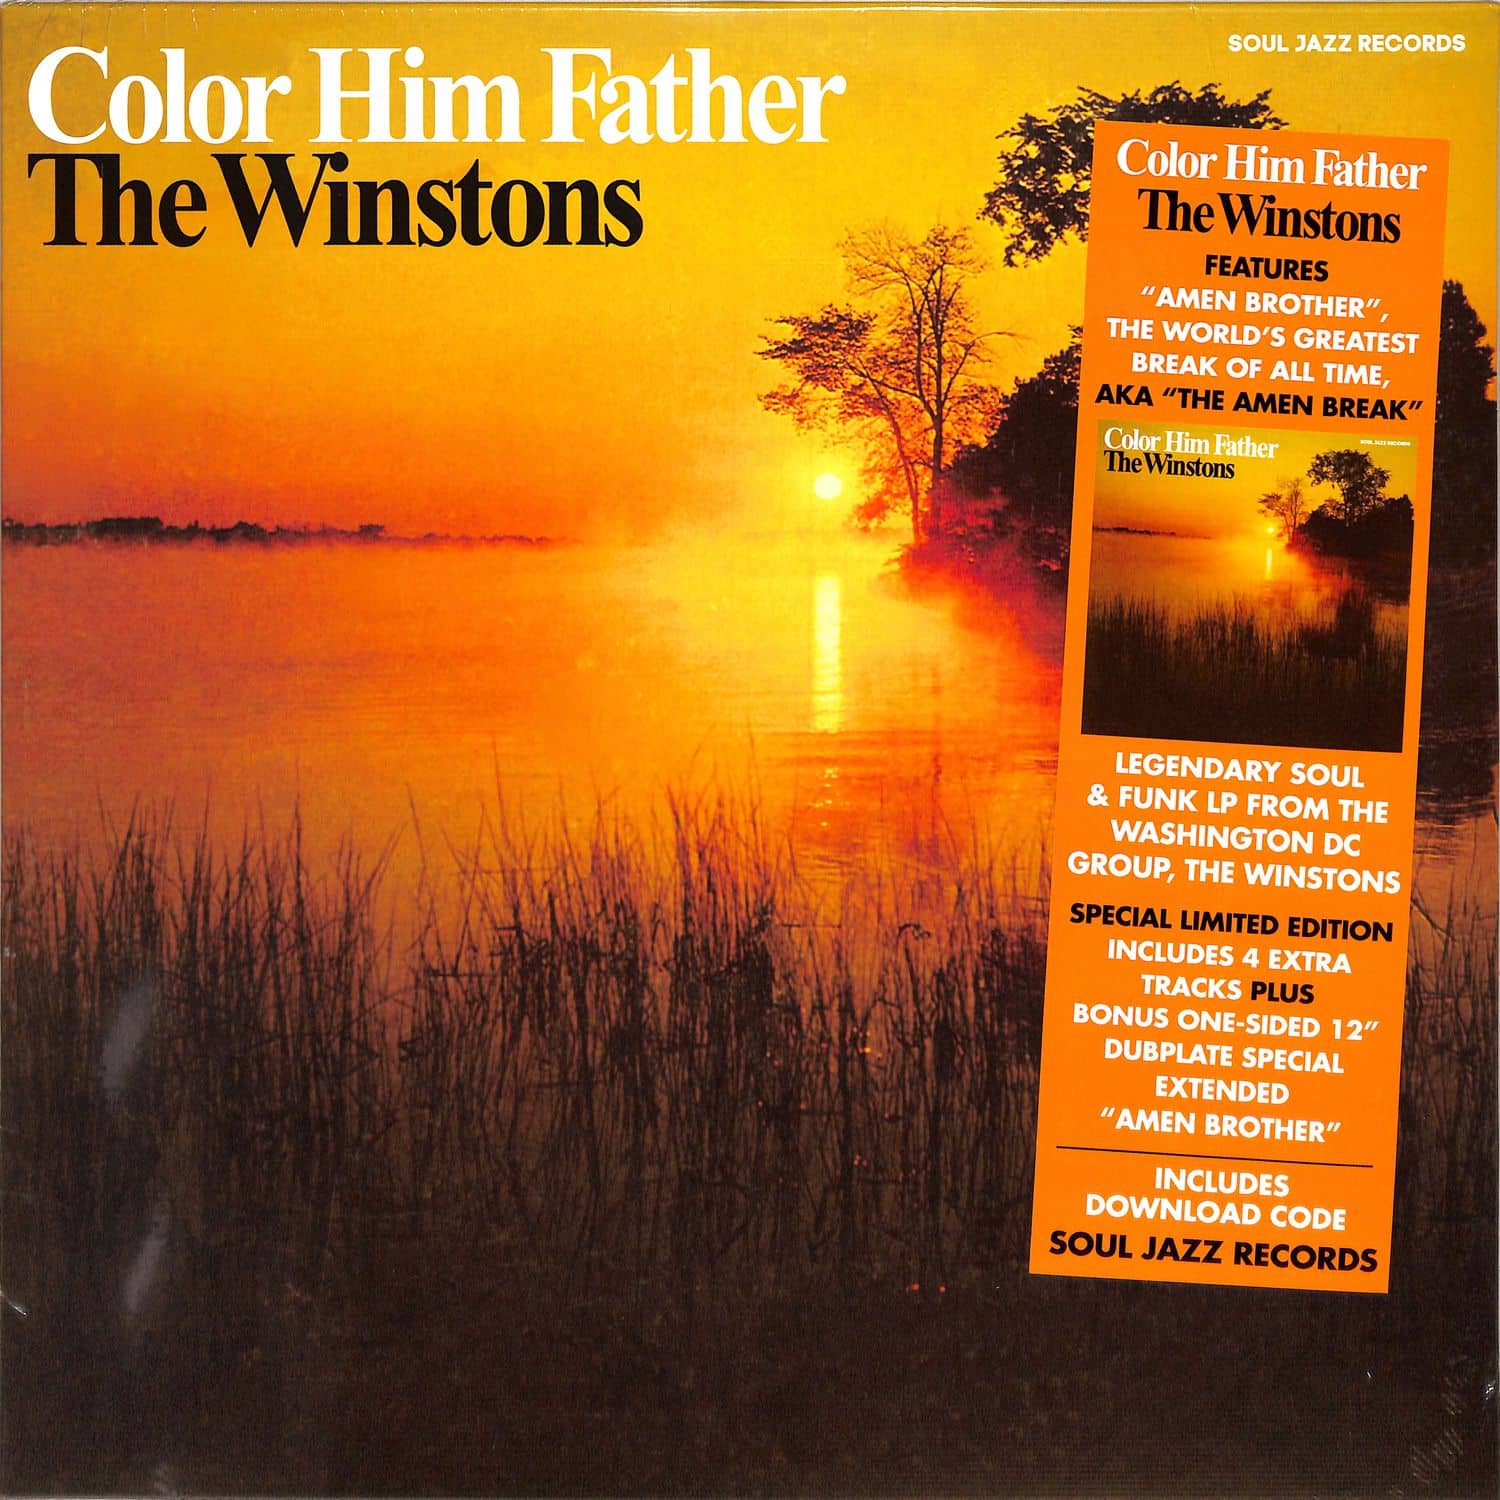 The Winstons - COLOR HIM FATHER 